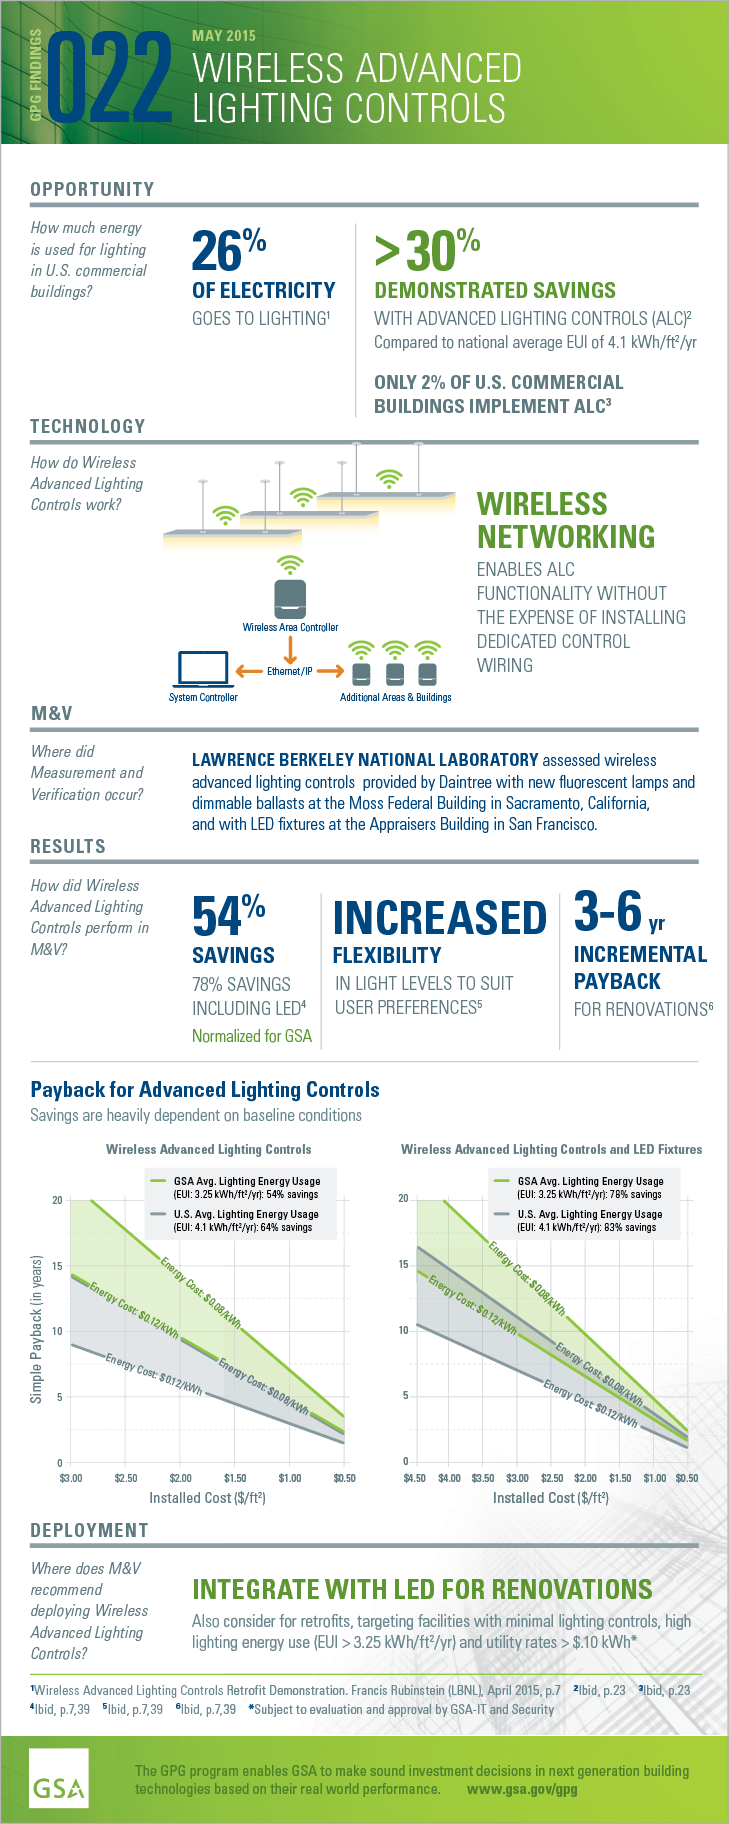 Download the PDF version of the full-sized infographic for GPG022 Wireless Advanced Lighting Controls.